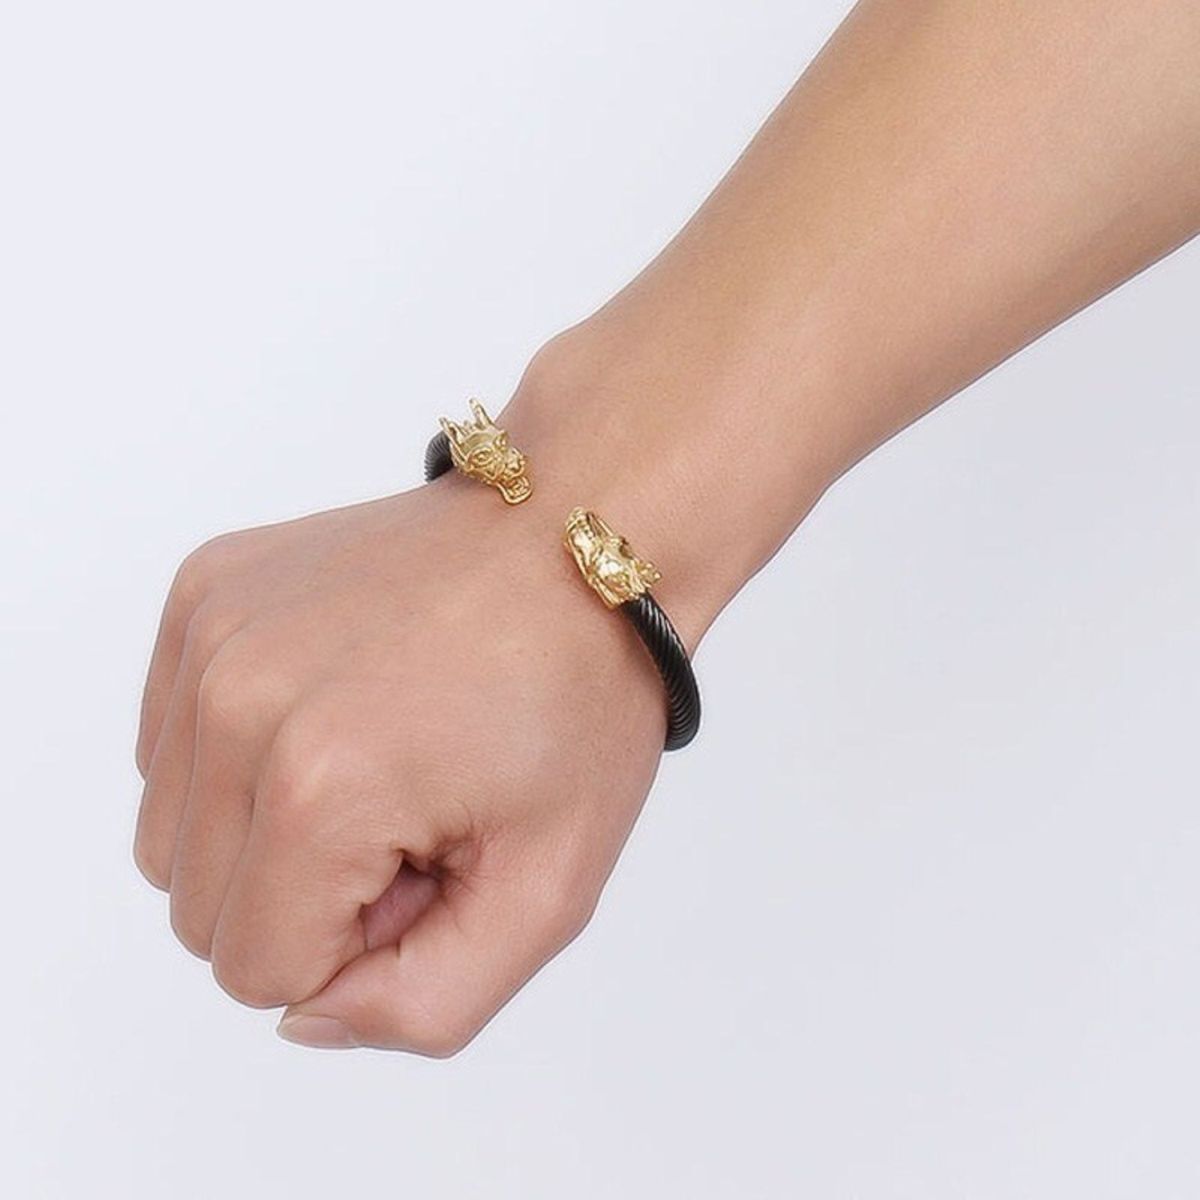 Mens Frosted Gold Link 24k Gold Bracelet Mens With S Buckle 24k Plated  Jewelry Gift From Llisamarynor, $24.37 | DHgate.Com